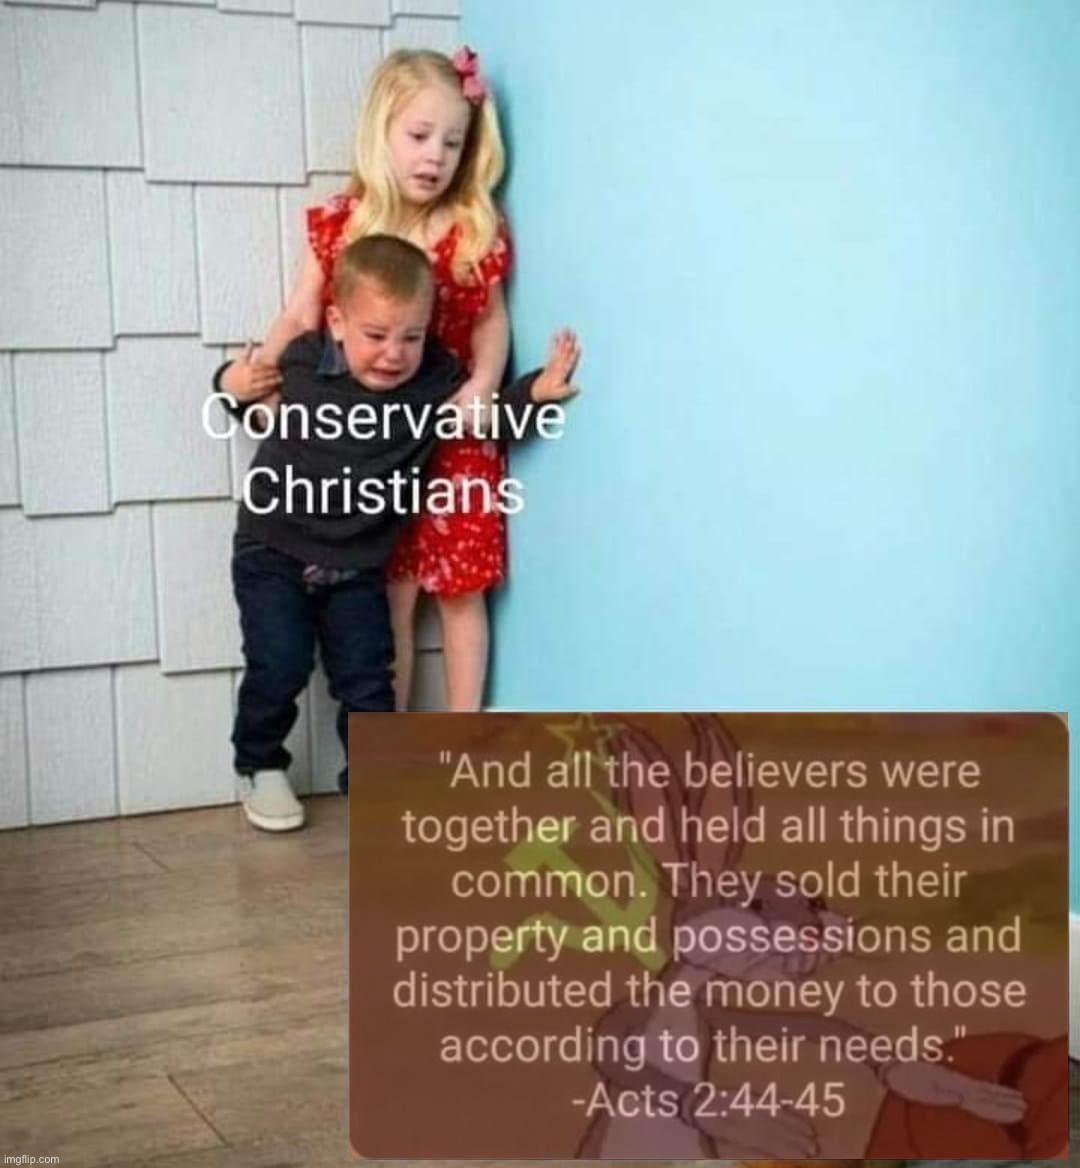 Conservative Christians vs. acts 2:44-45 | image tagged in conservative christians vs acts 2 44-45 | made w/ Imgflip meme maker